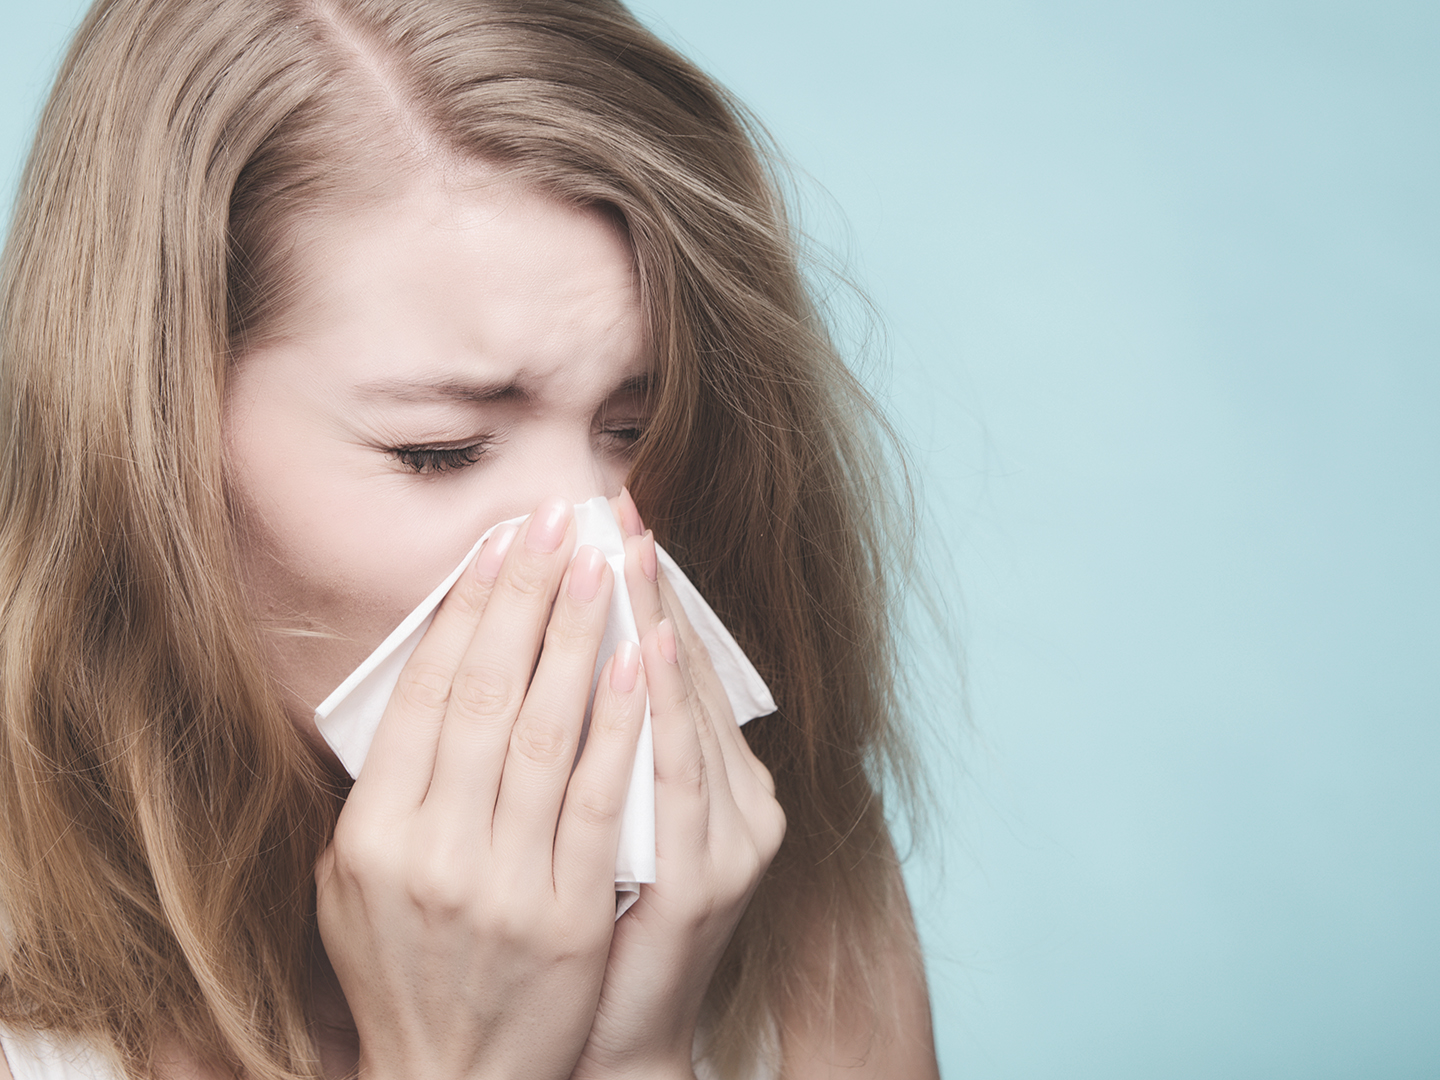 Suffering from the cold or flu this season? It may be your body flushing toxins.